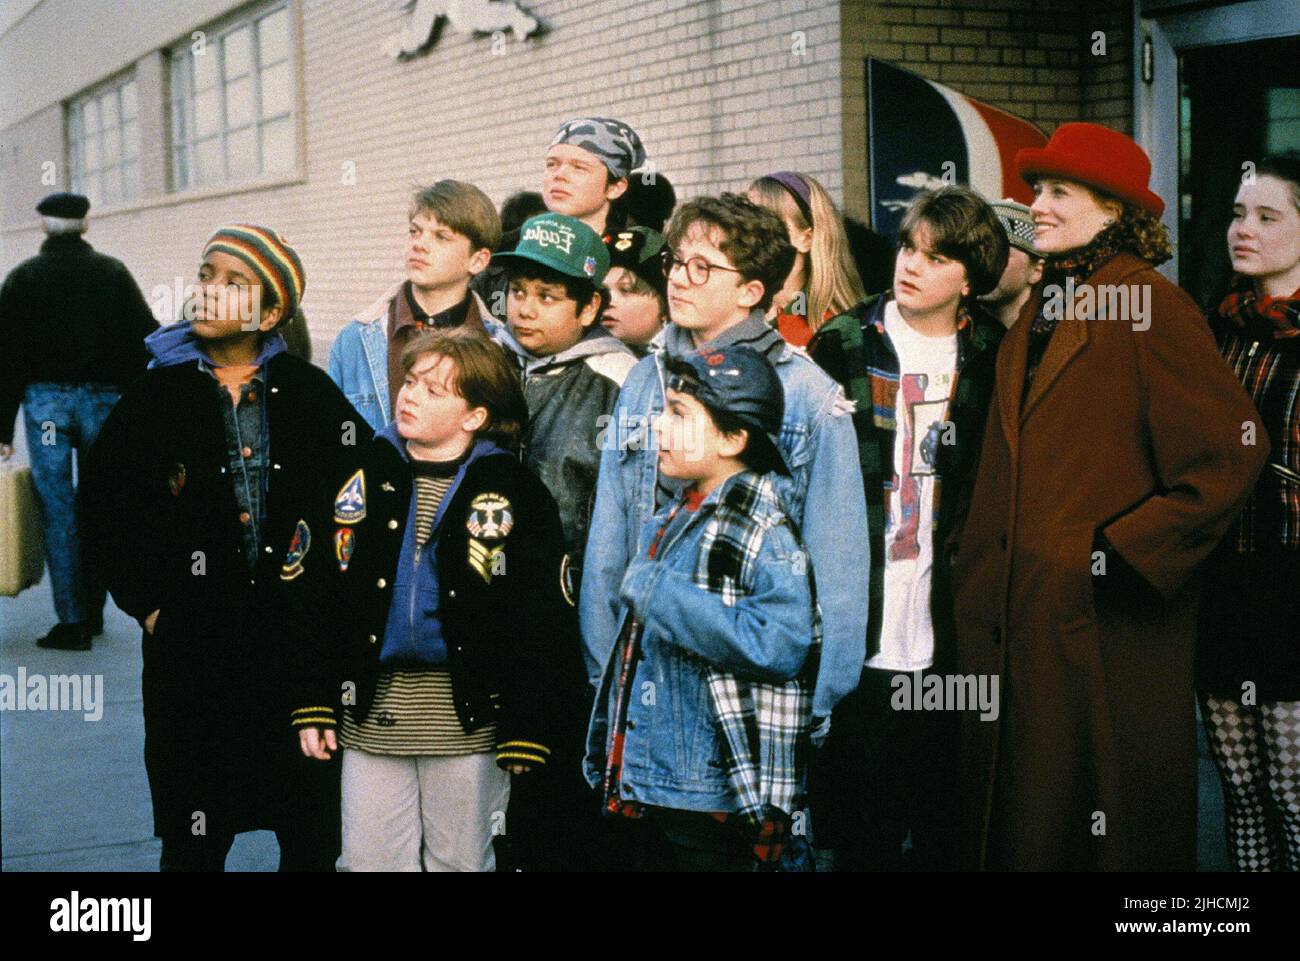 The Mighty Ducks (1992) is a Great Movie to Teach Your Kids About